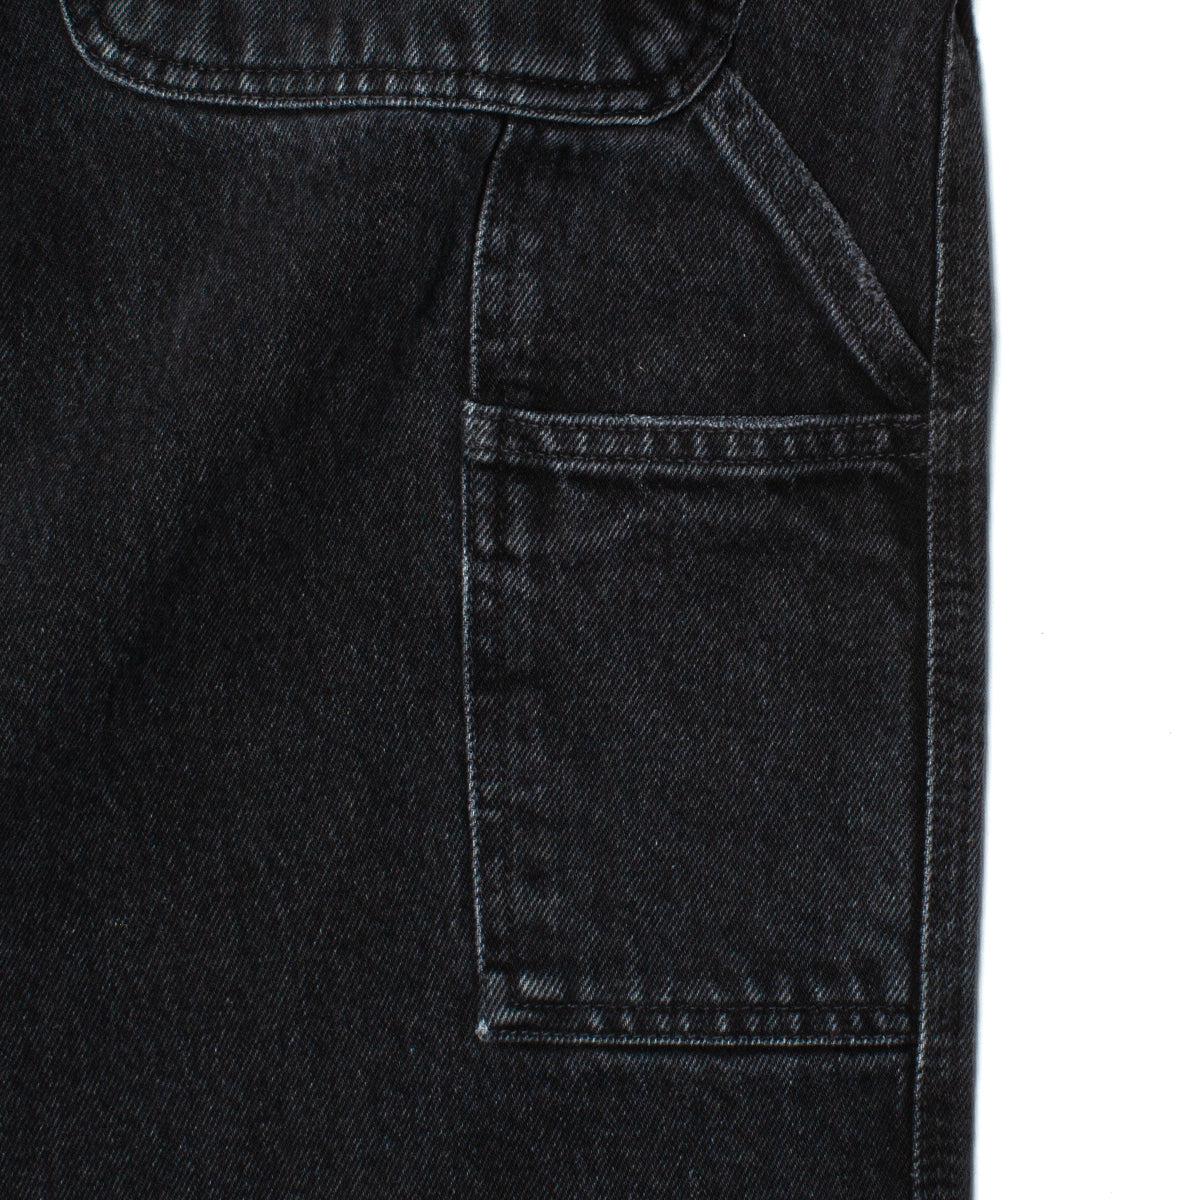 Carhartt WIP | Single Knee Pant Style # I032024-8906 Color : Black (Stone Washed)